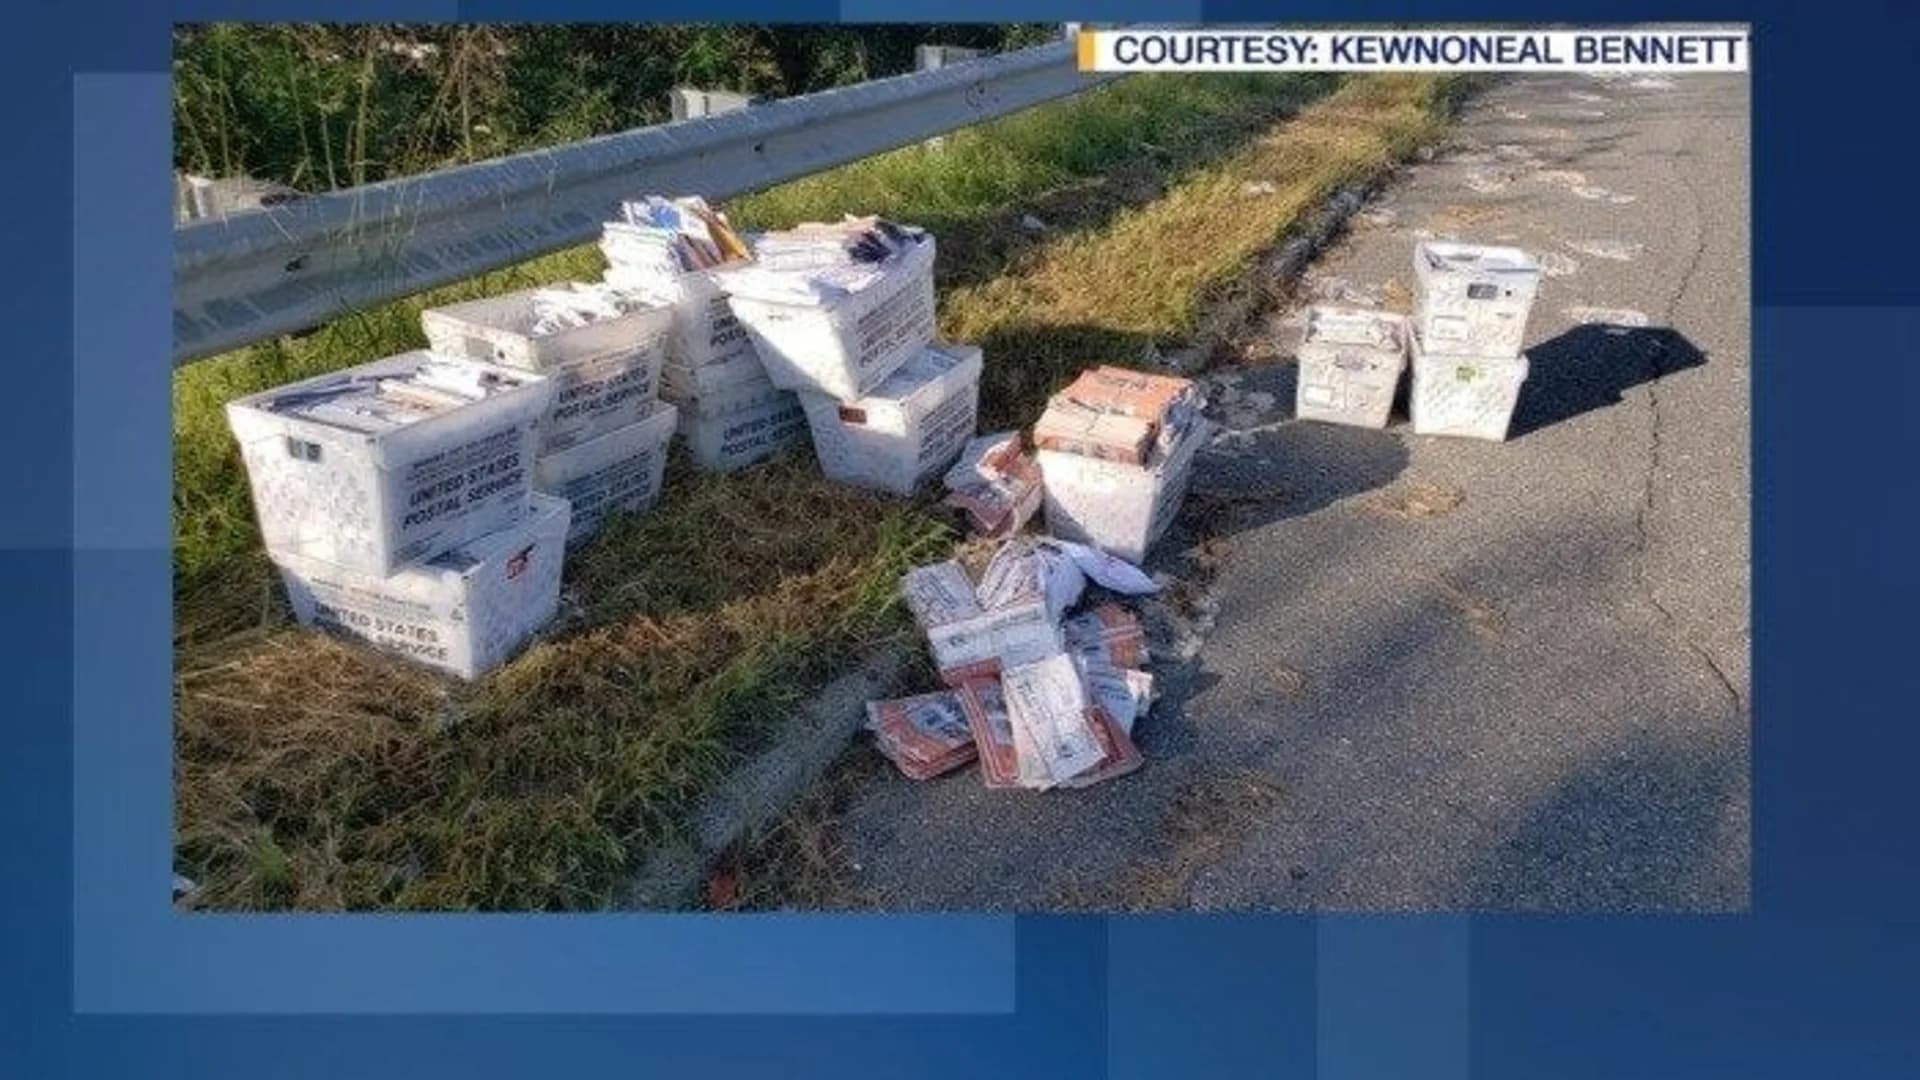 Postal worker quits job, leaves mail on side of New Jersey road